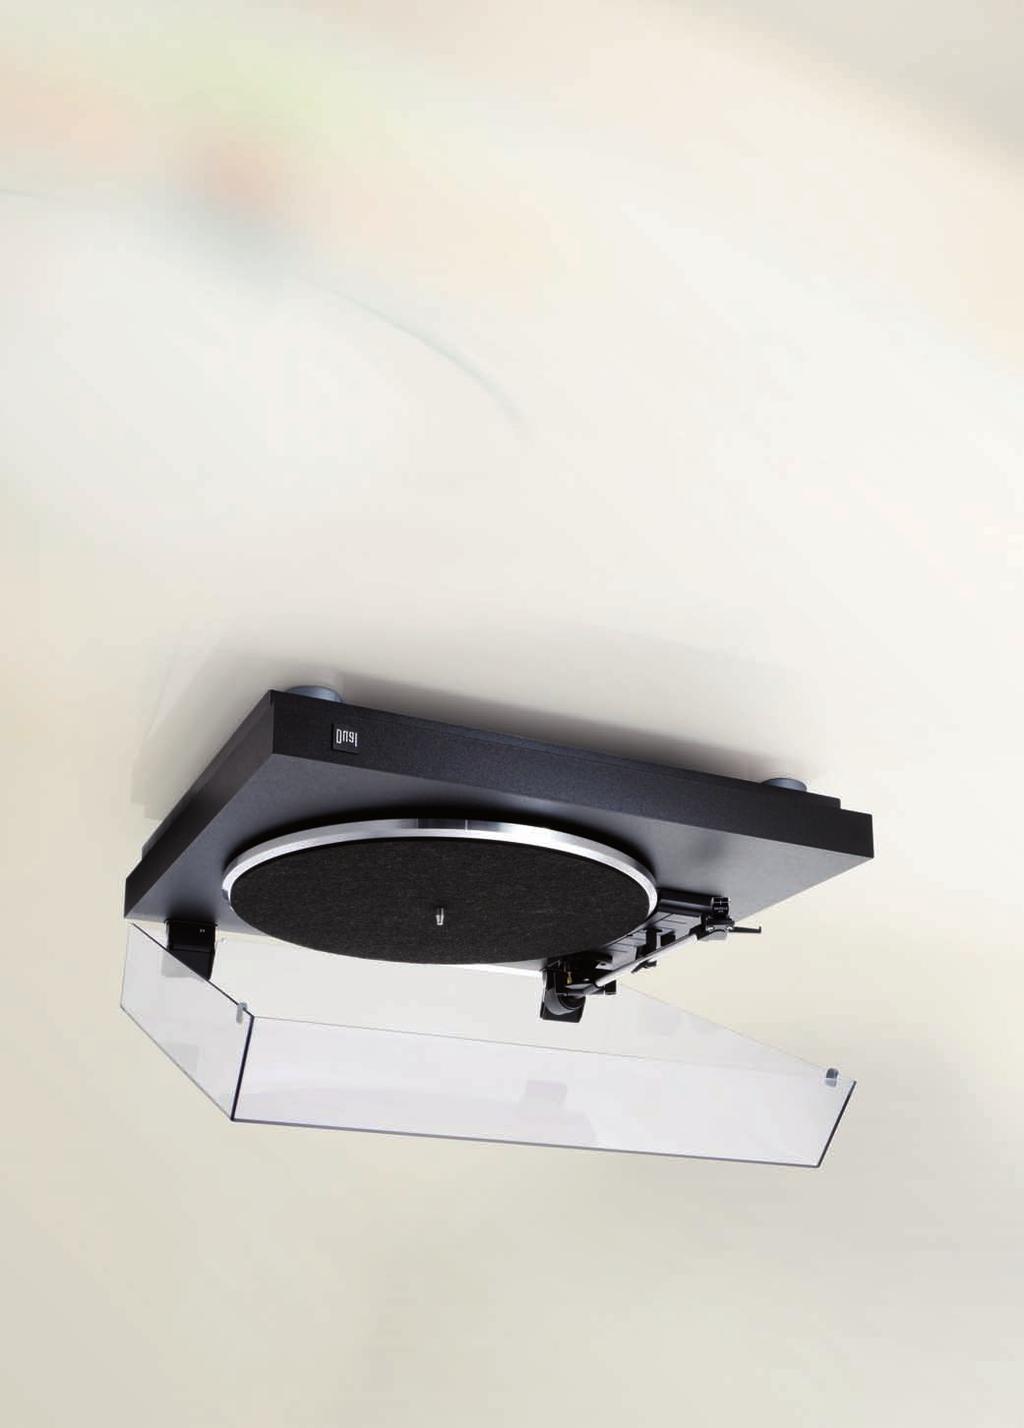 CS 440 Colour: Black Fully-Automatic Simple choice of material, but a high standard of quality ensure in this fully automatic turntable; Analog music enjoyment.